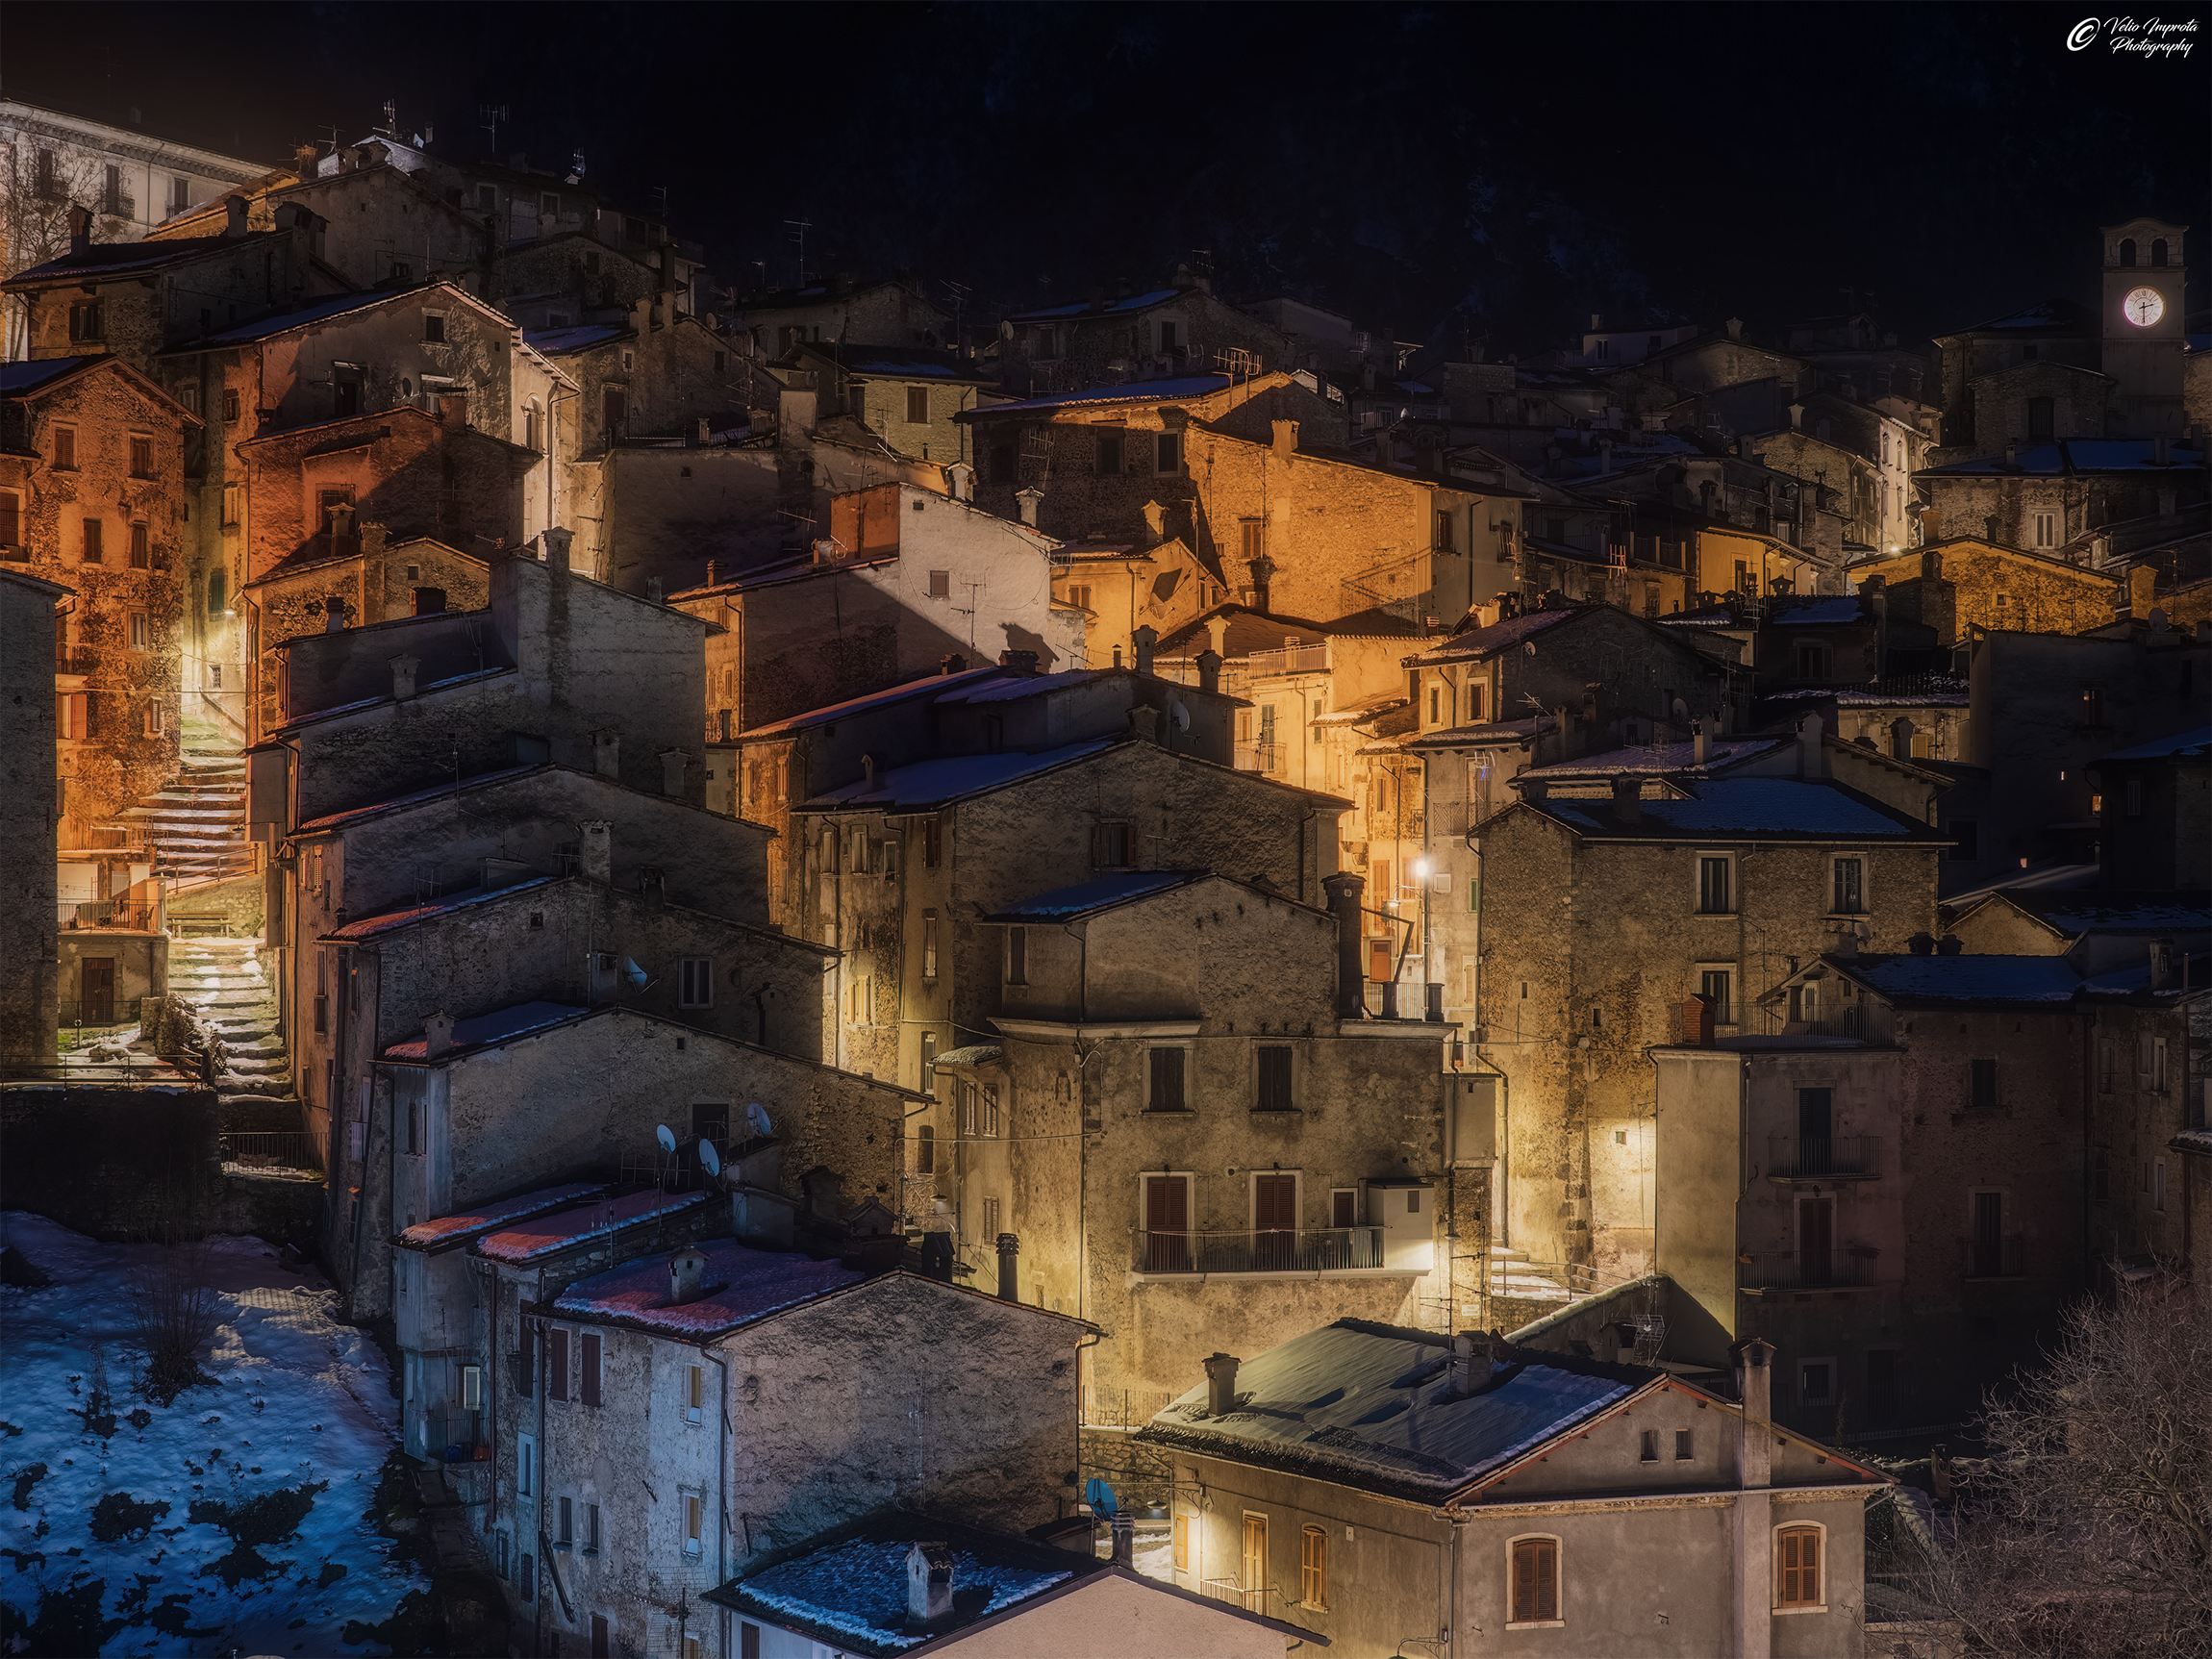 Scanno in the evening...